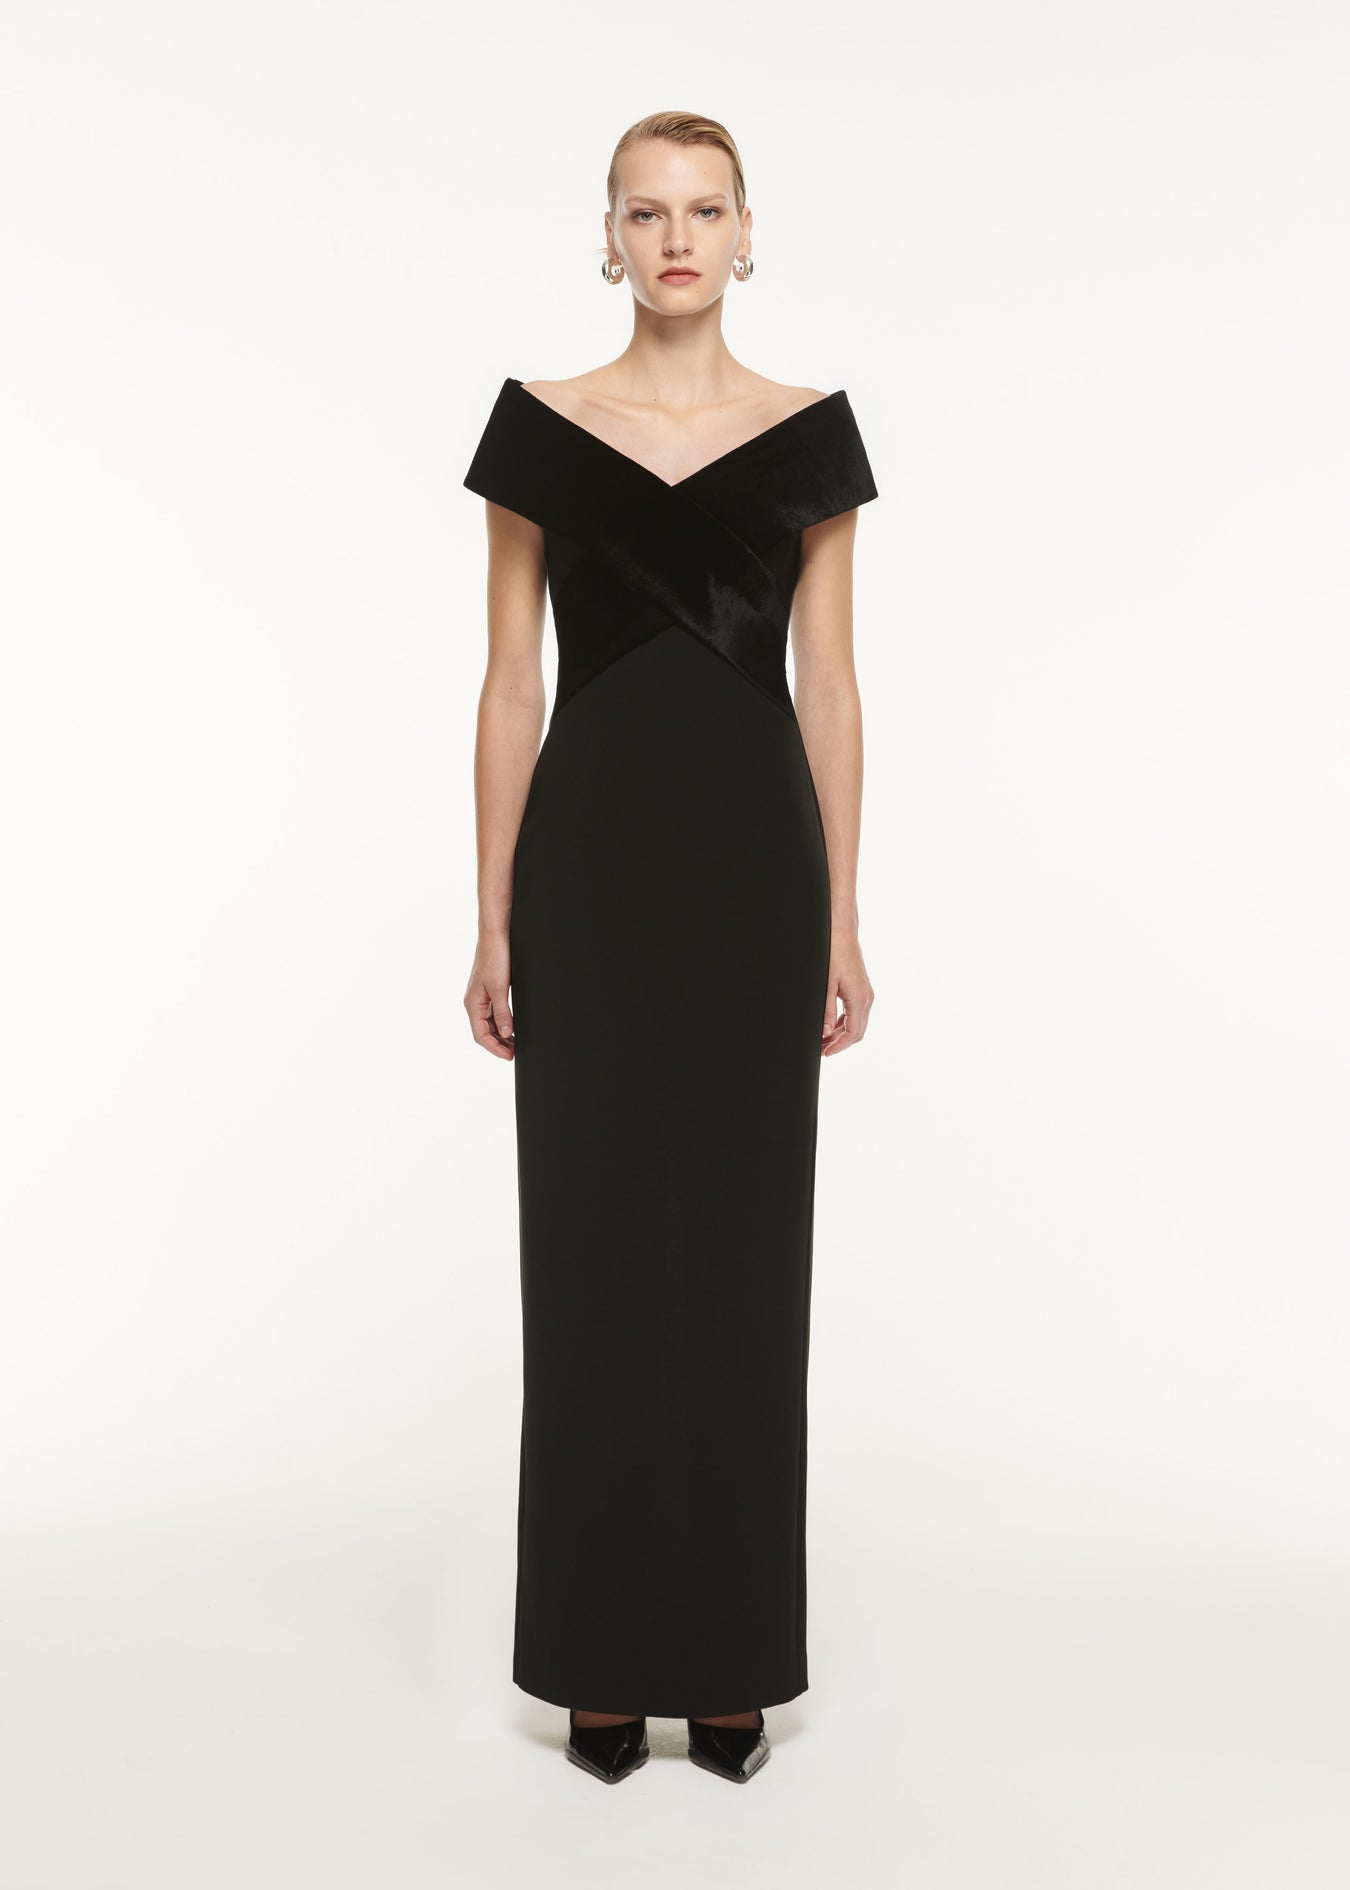 A woman wearing the Off The Shoulder Stretch Cady Maxi Dress Black